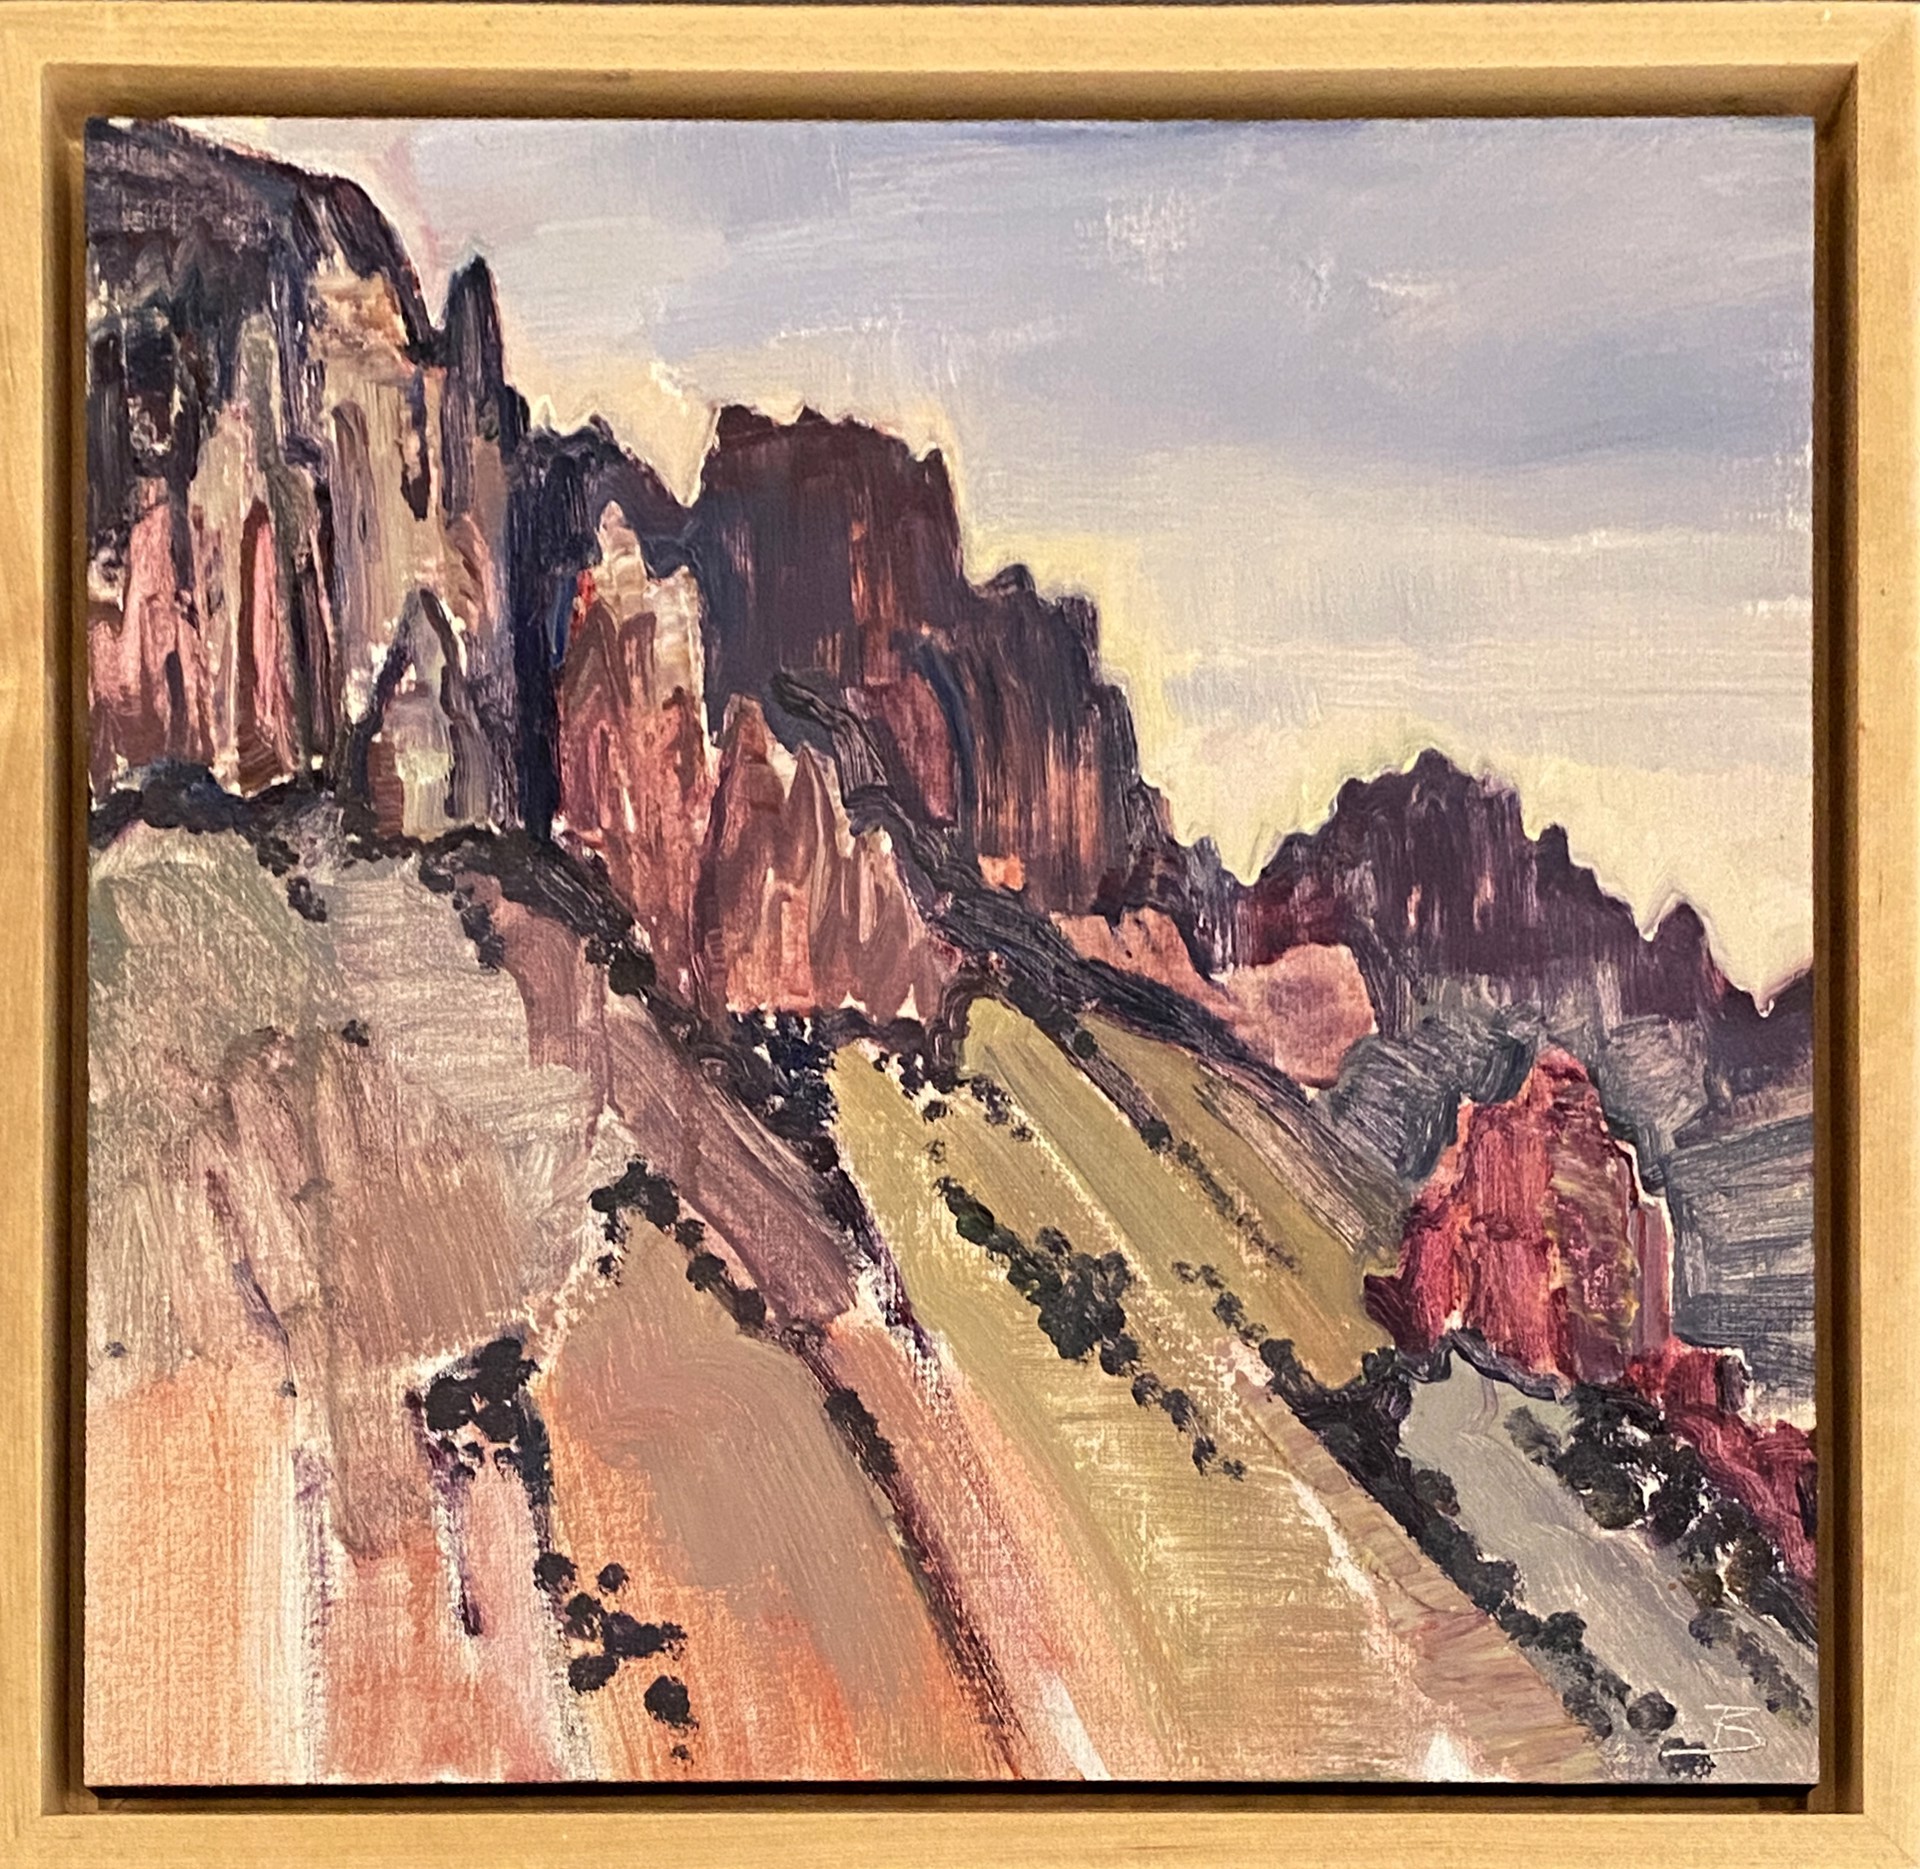 En Route to Chisos Basin by Mary Baxter